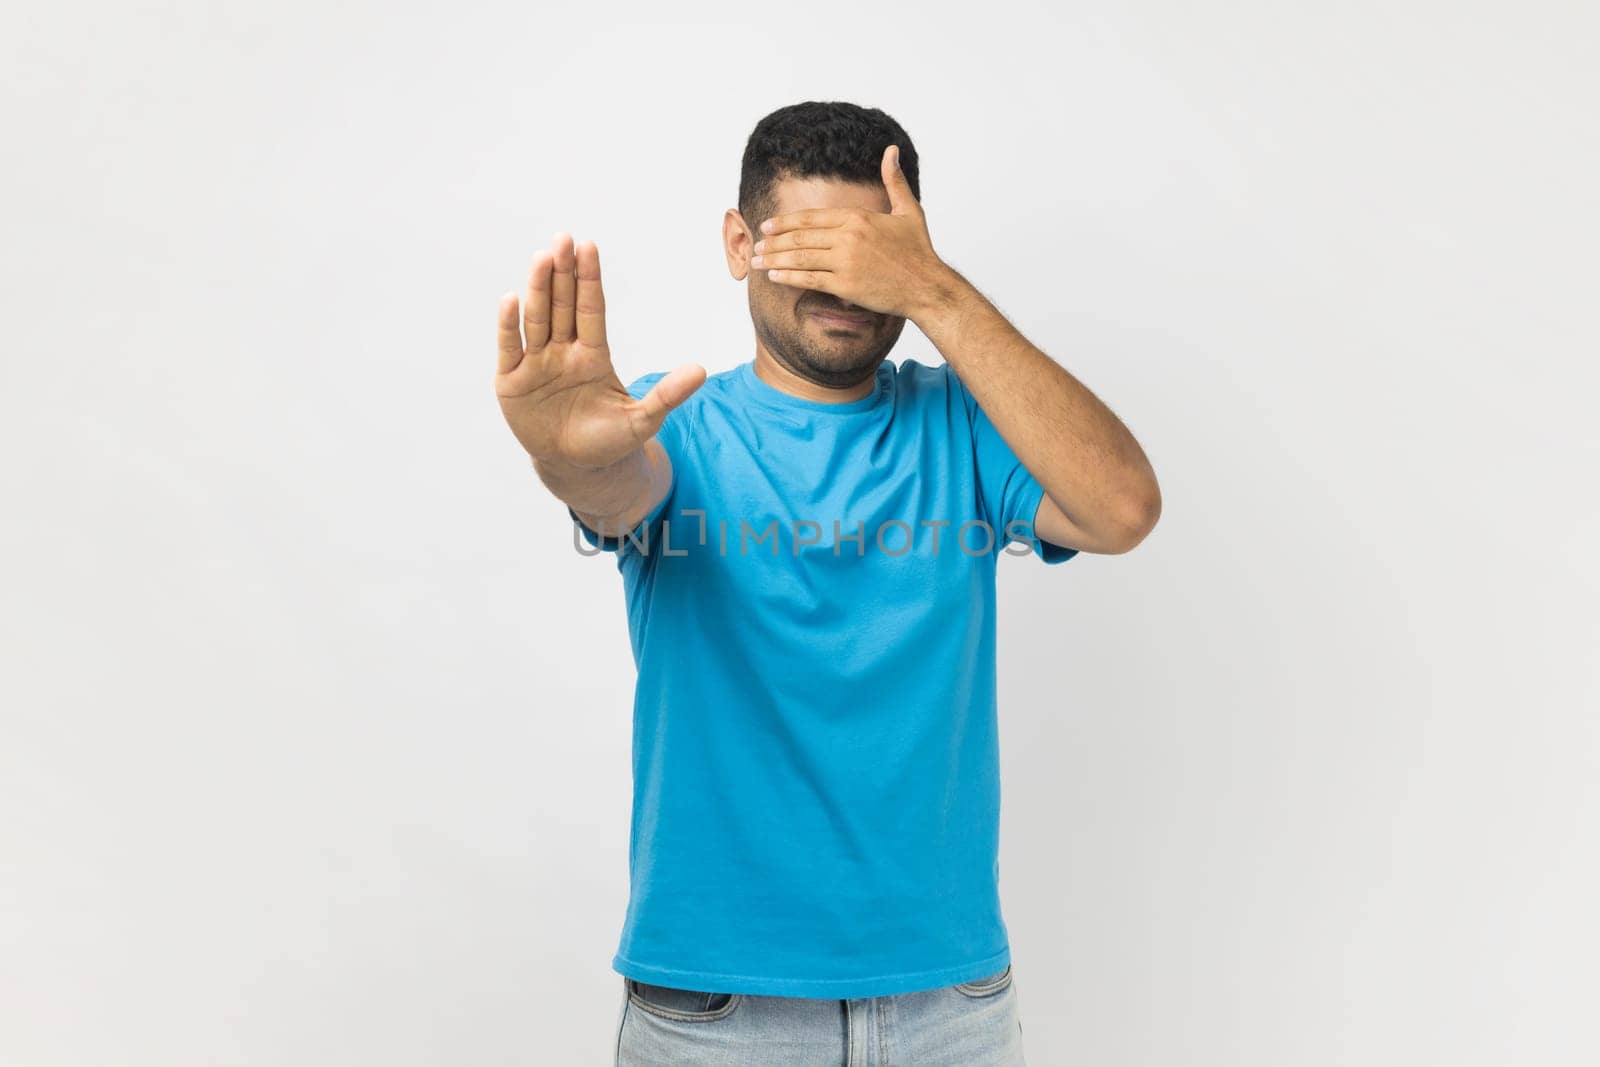 Unshaven man in T- shirt standing covering his face with hand, hiding his face, making stop gesture. by Khosro1